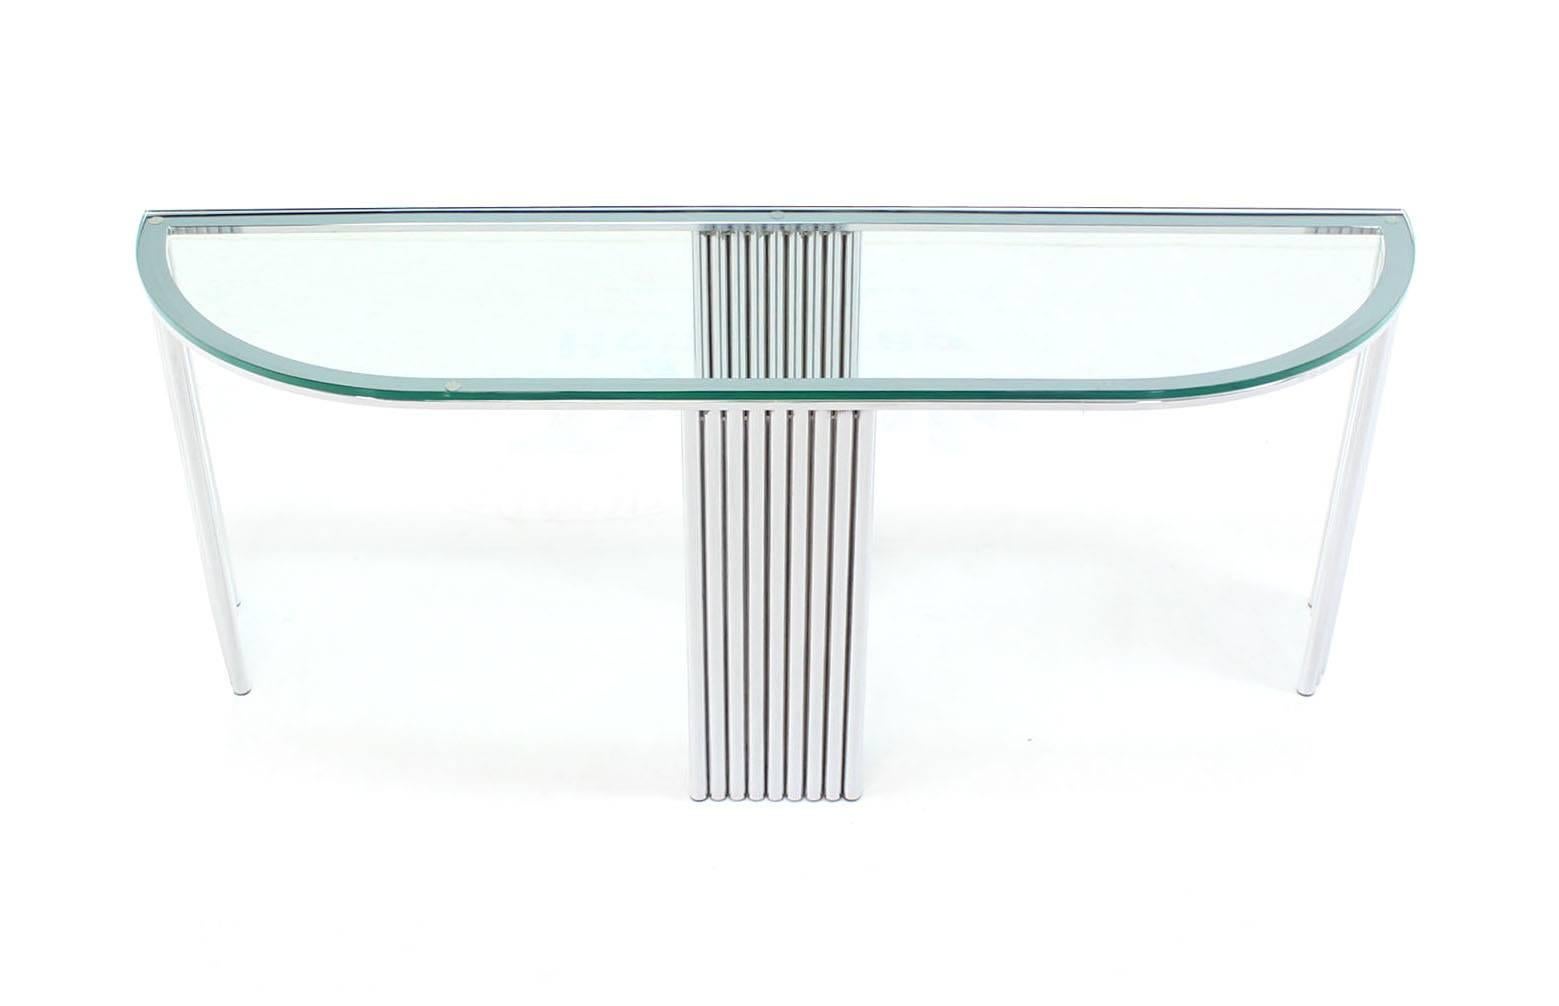 20th Century Wide Demilune Crome Rounded Corners Console Table